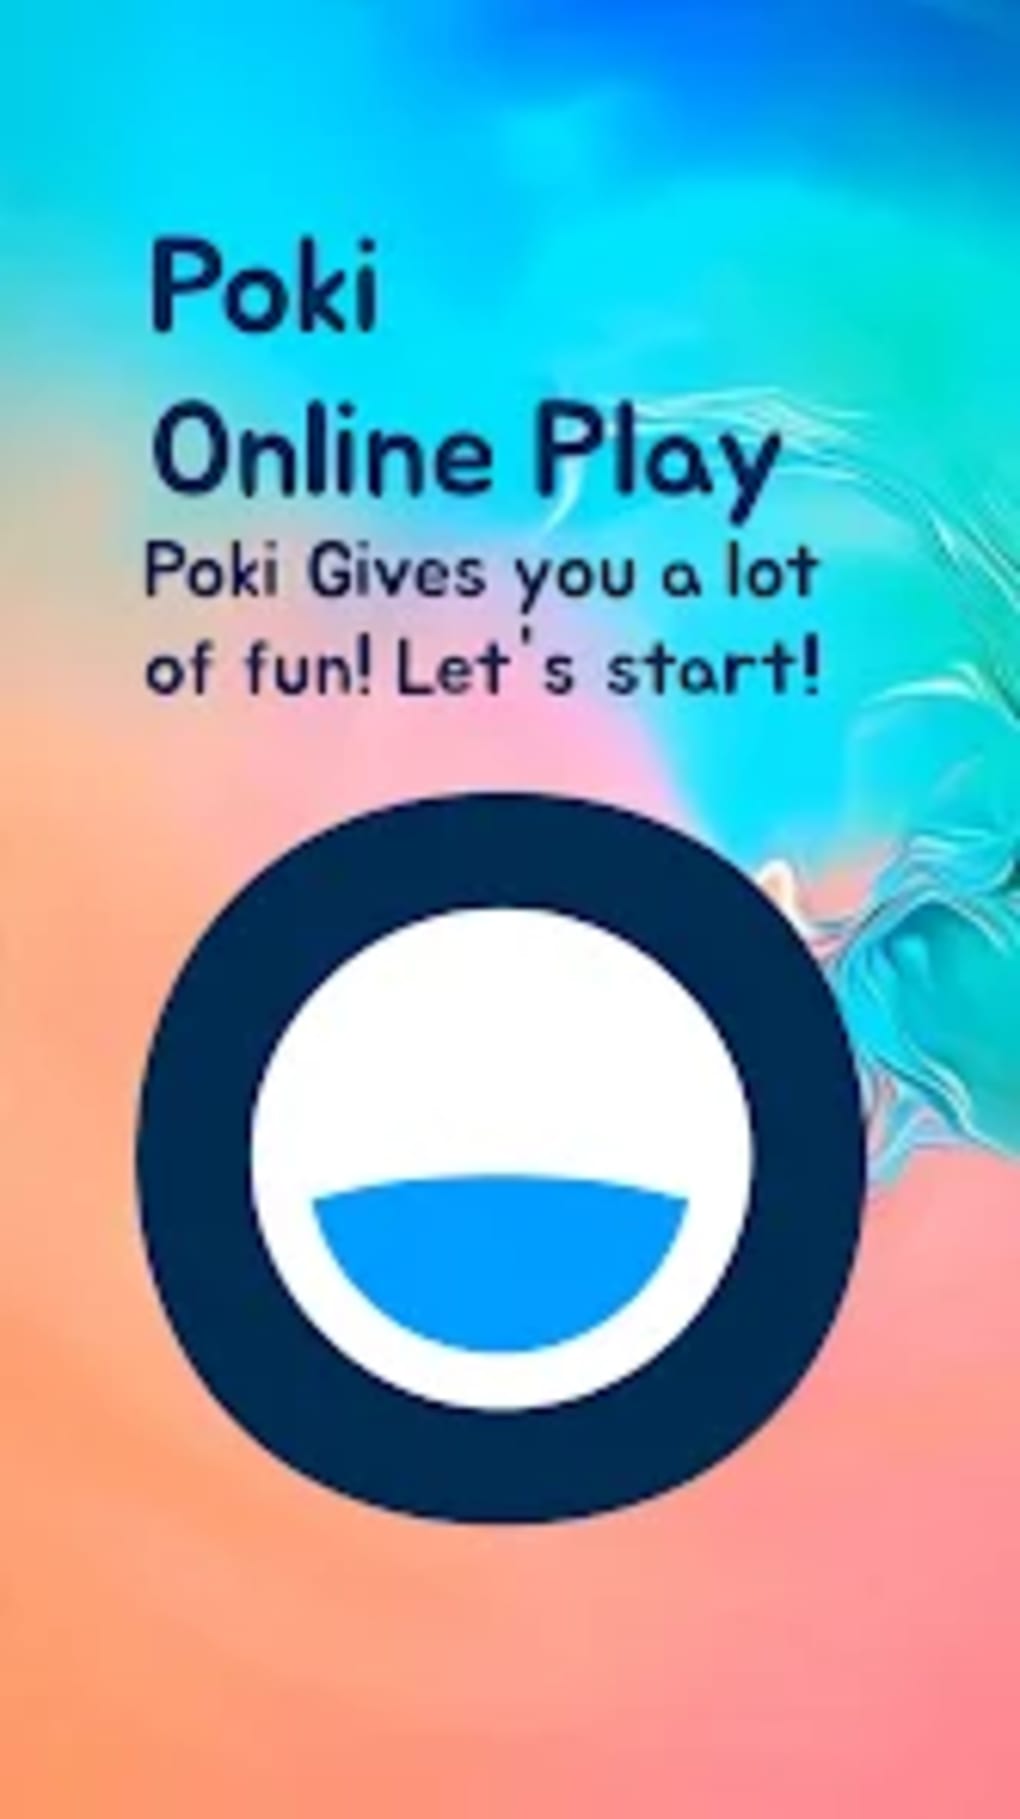 Poki Online Play for Android